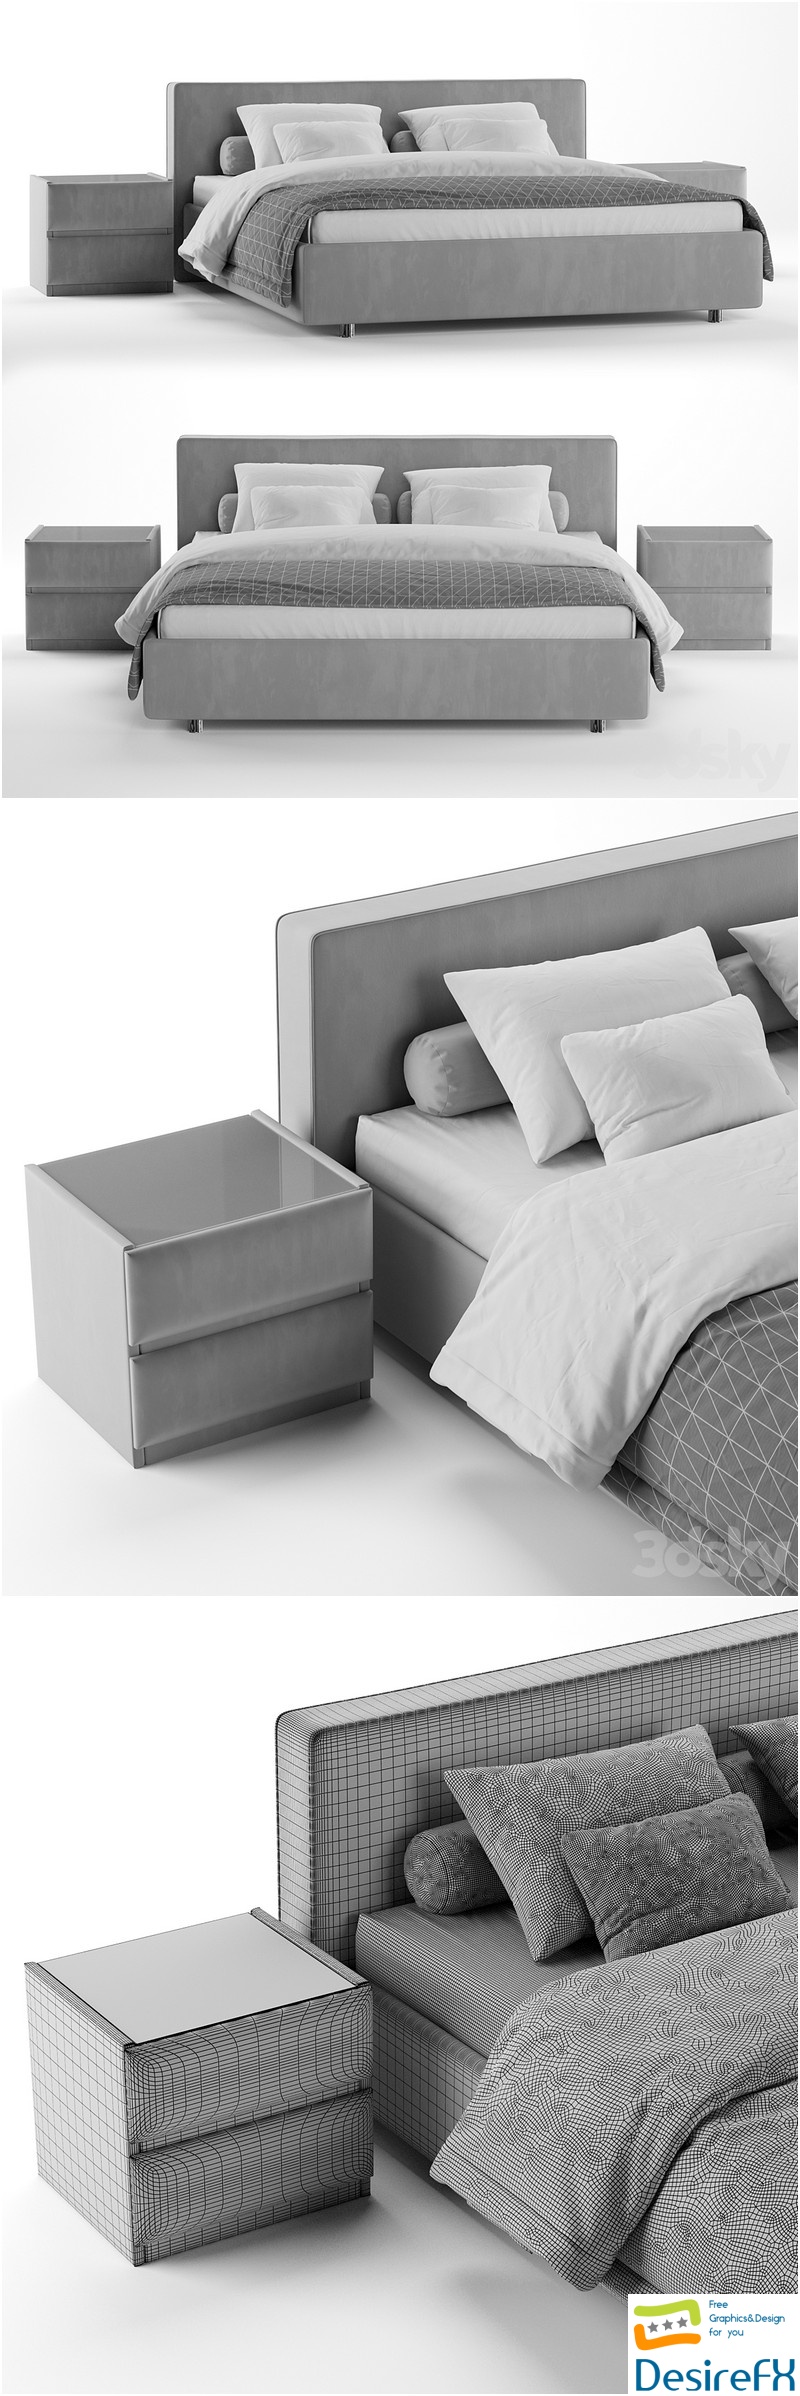 Luiza Grand bed with Oscar side tables 3D Model